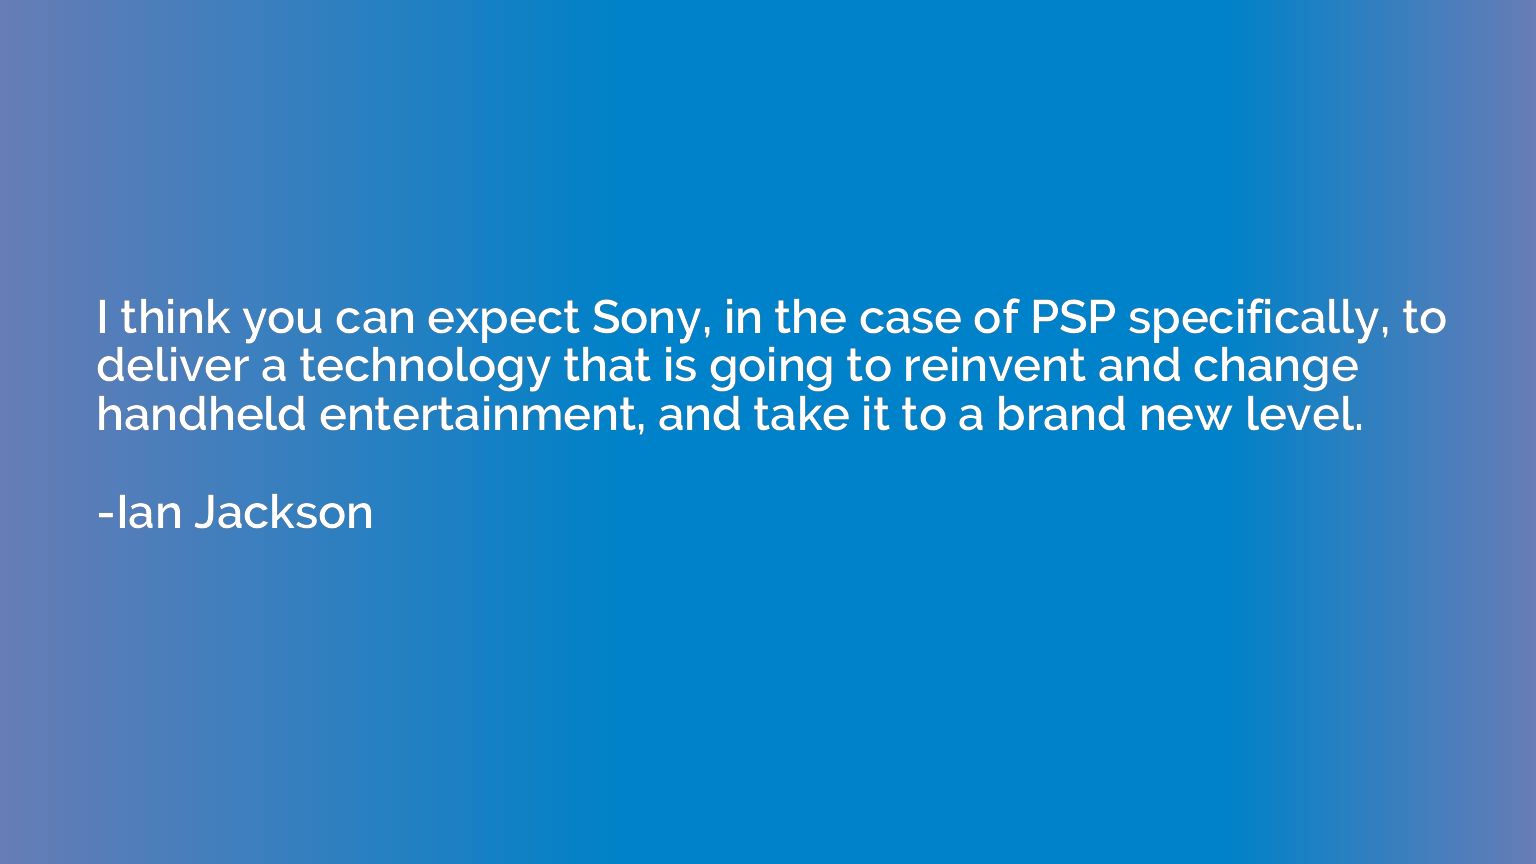 I think you can expect Sony, in the case of PSP specifically